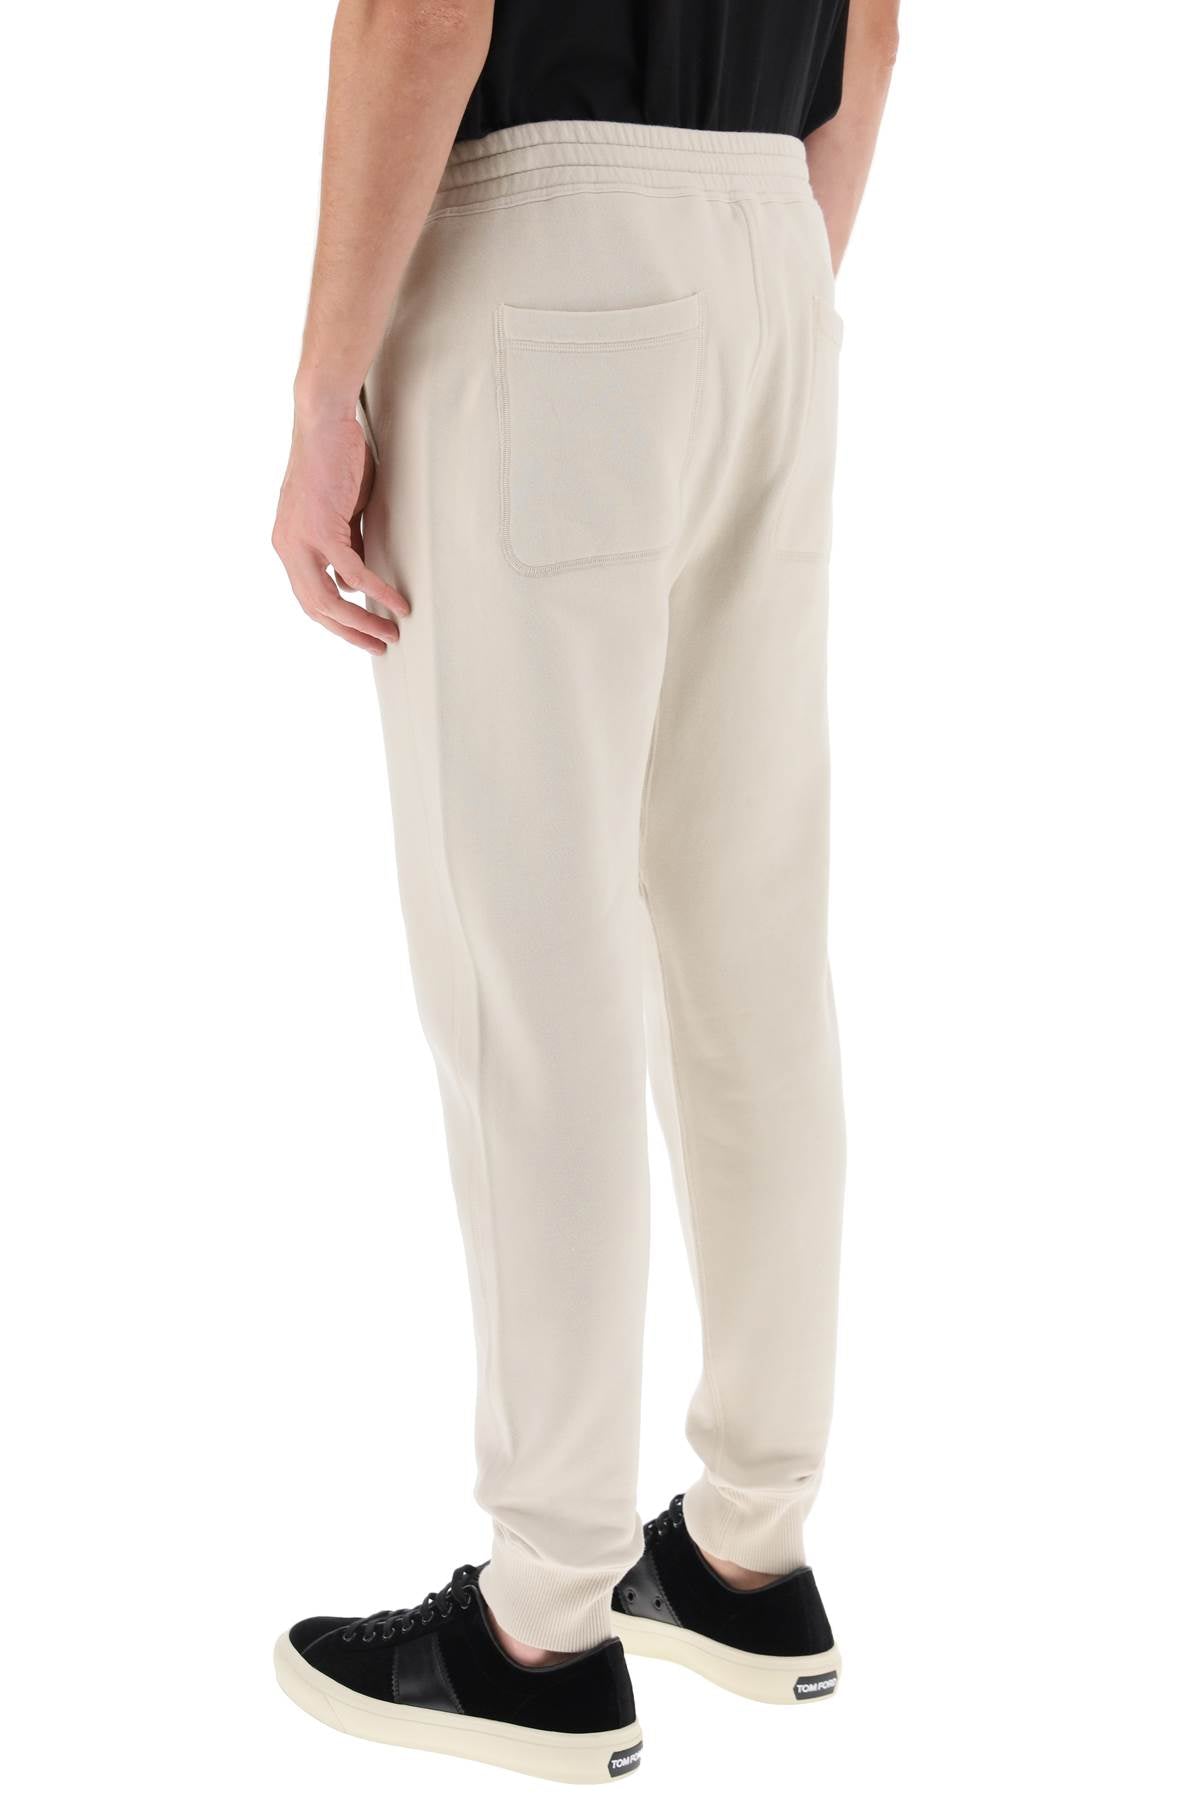 TOM FORD Mid-Weight Cotton Drawstring Sweatpants for Men